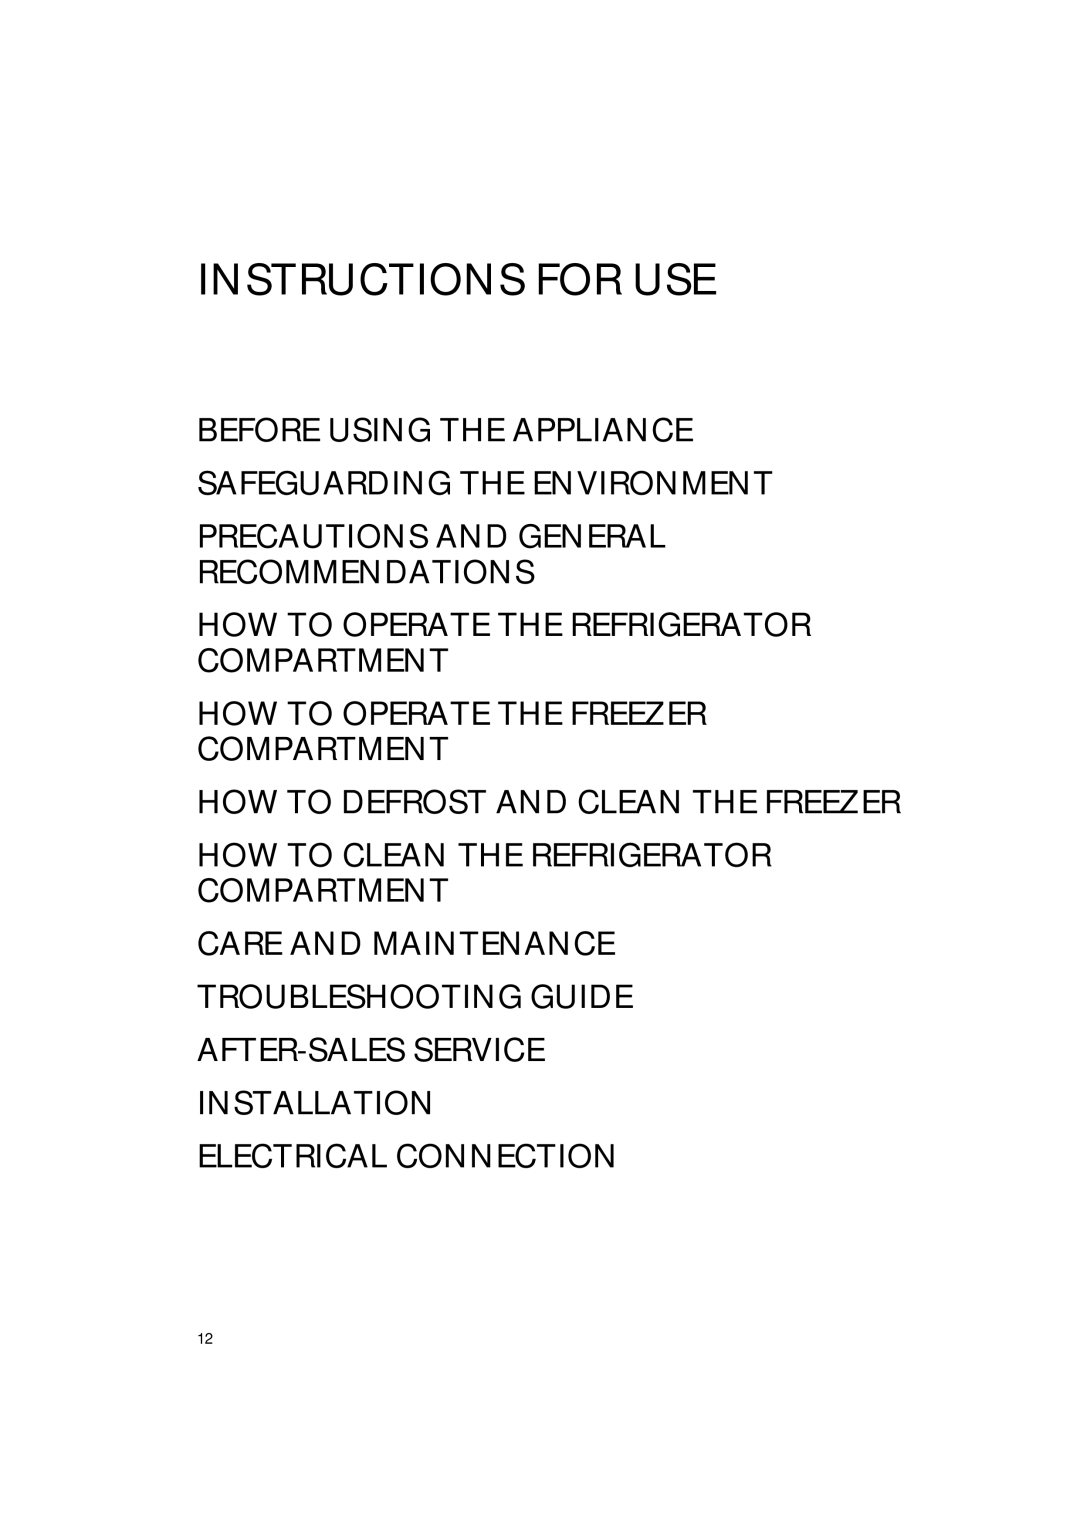 Smeg FR238A7 manual Before Using The Appliance Safeguarding The Environment, Precautions And General Recommendations 